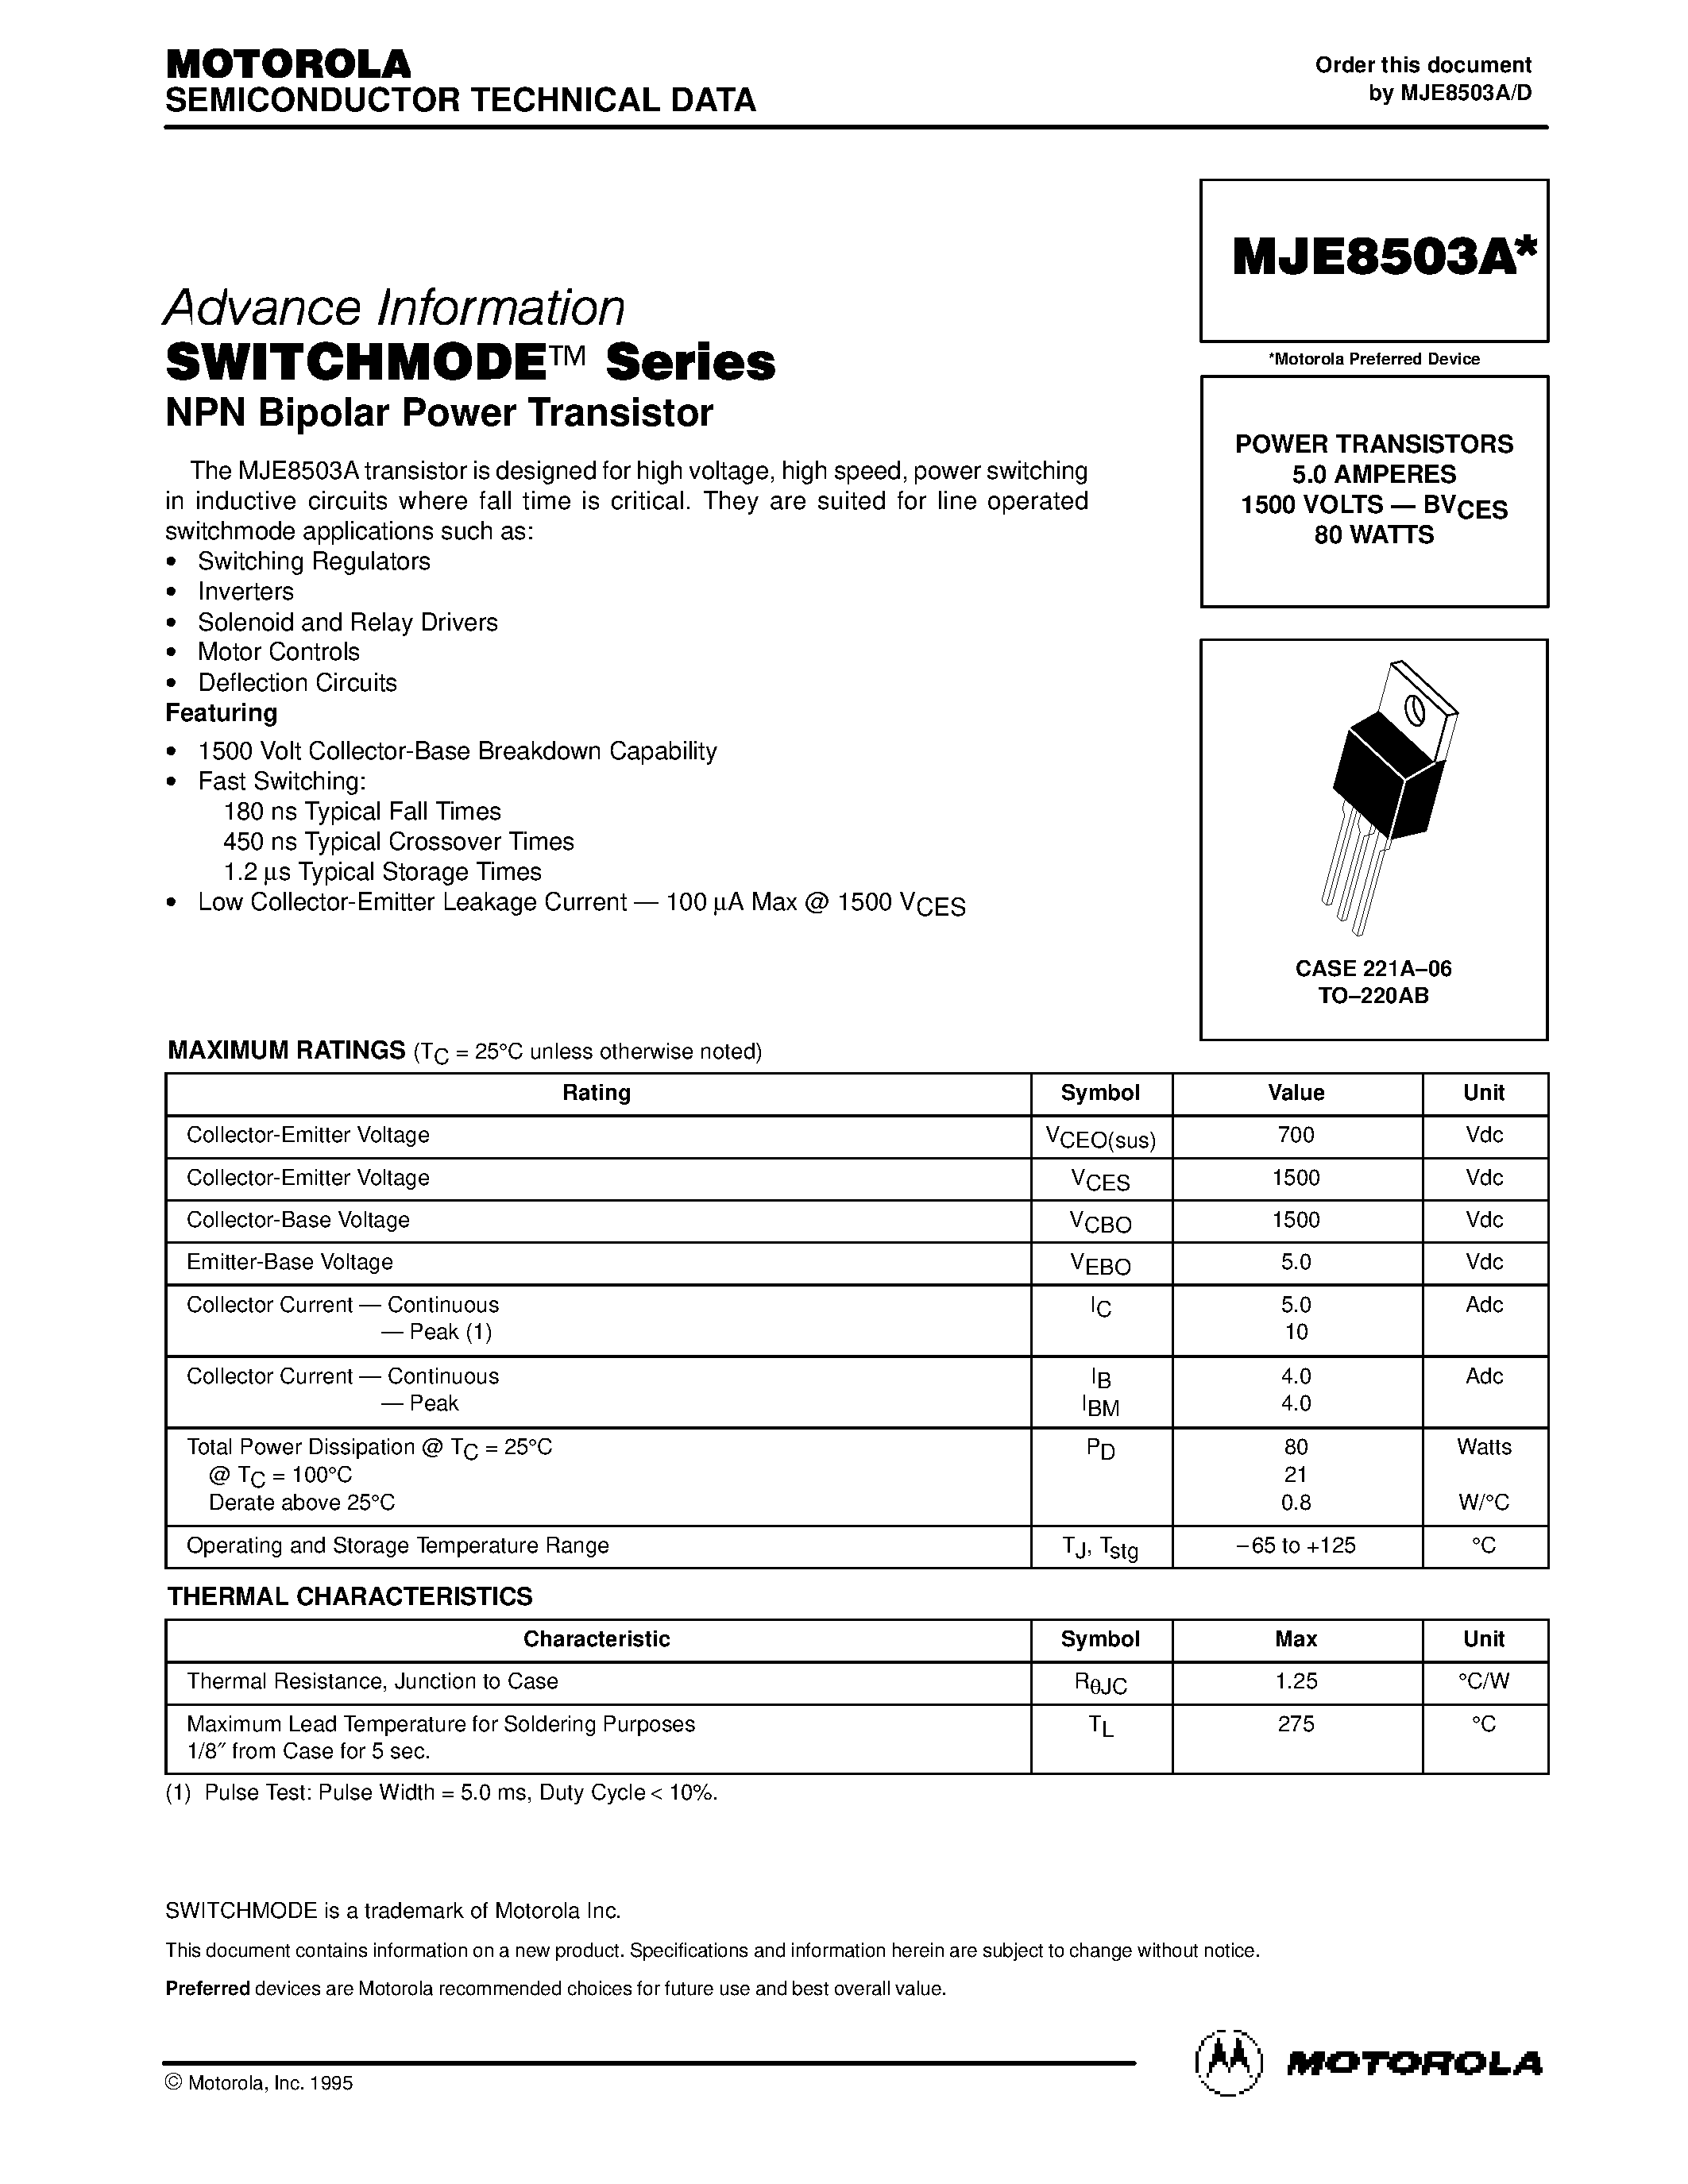 Datasheet MJE8503A - POWER TRANSISTORS 5.0 AMPERES 1500 VOLTS - BVCES 80 WATTS page 1